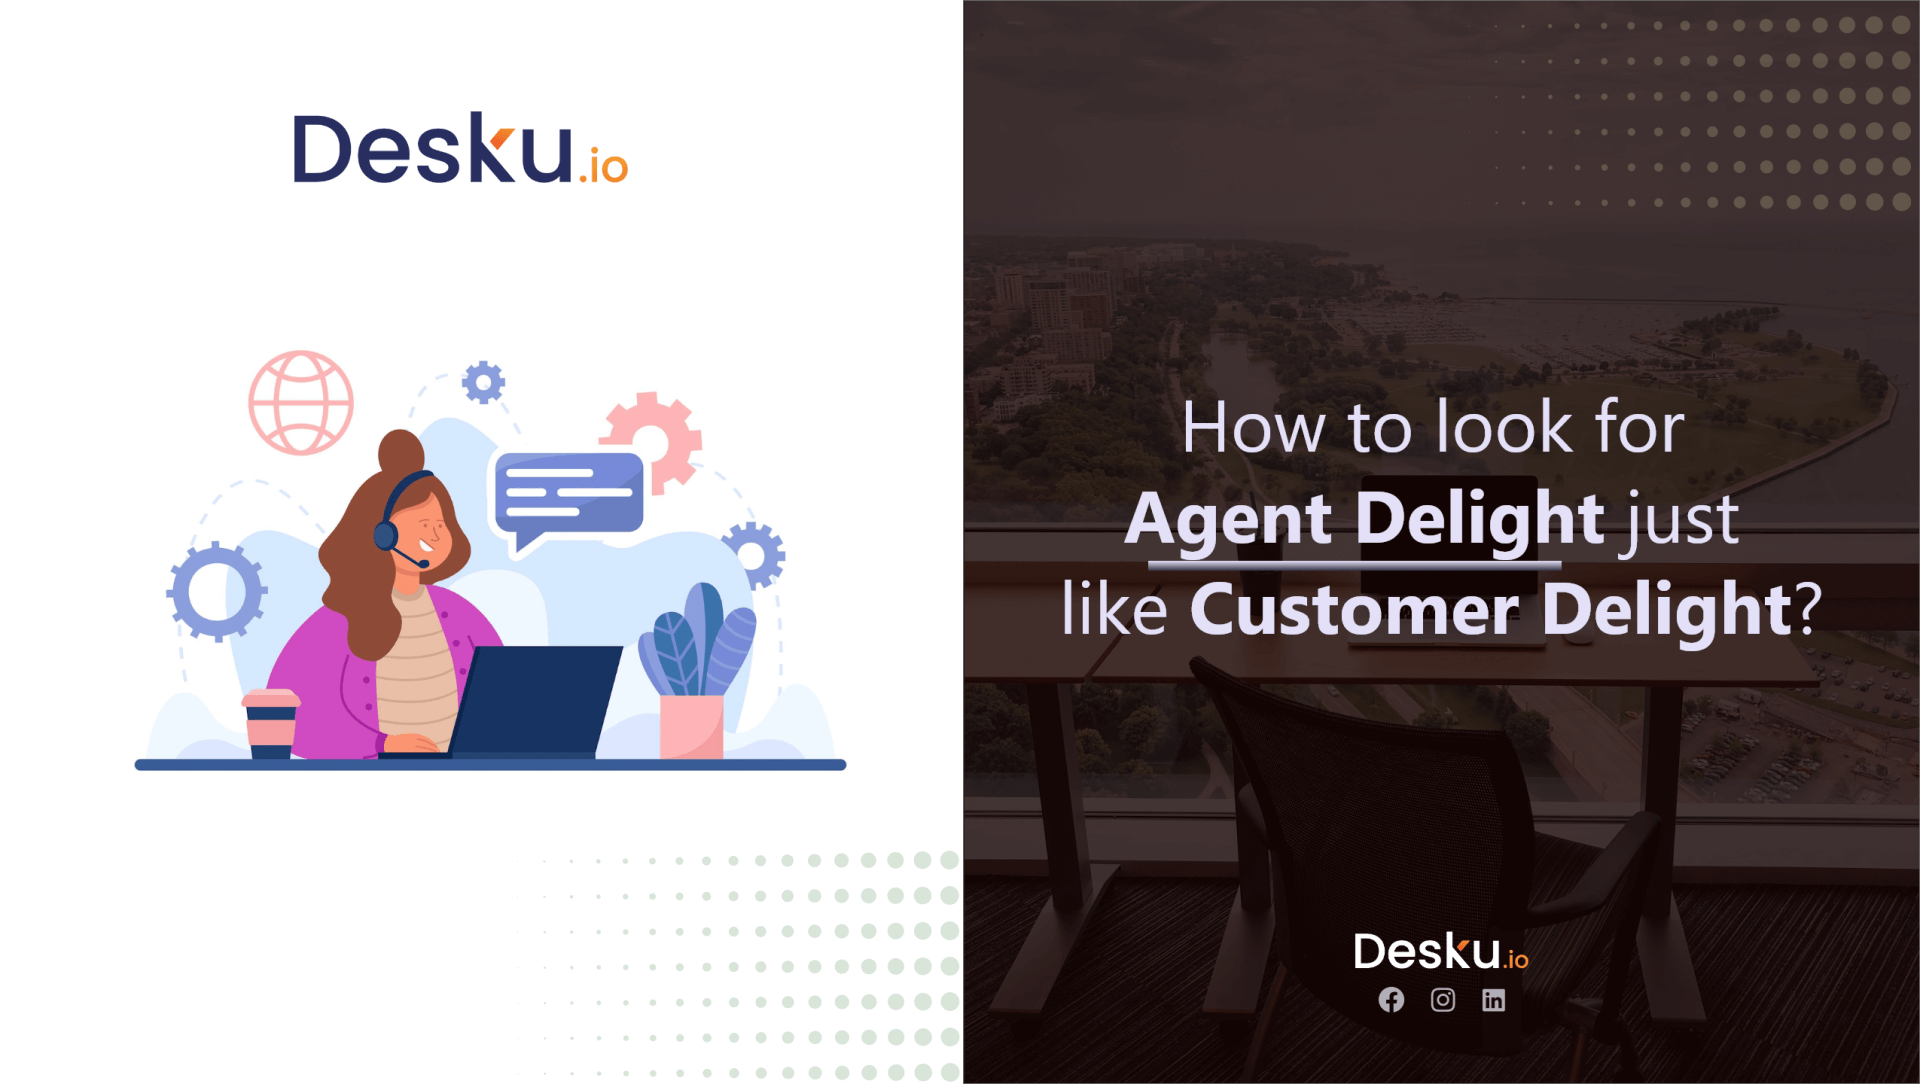 How to look for Agent Delight just like Customer Delight?